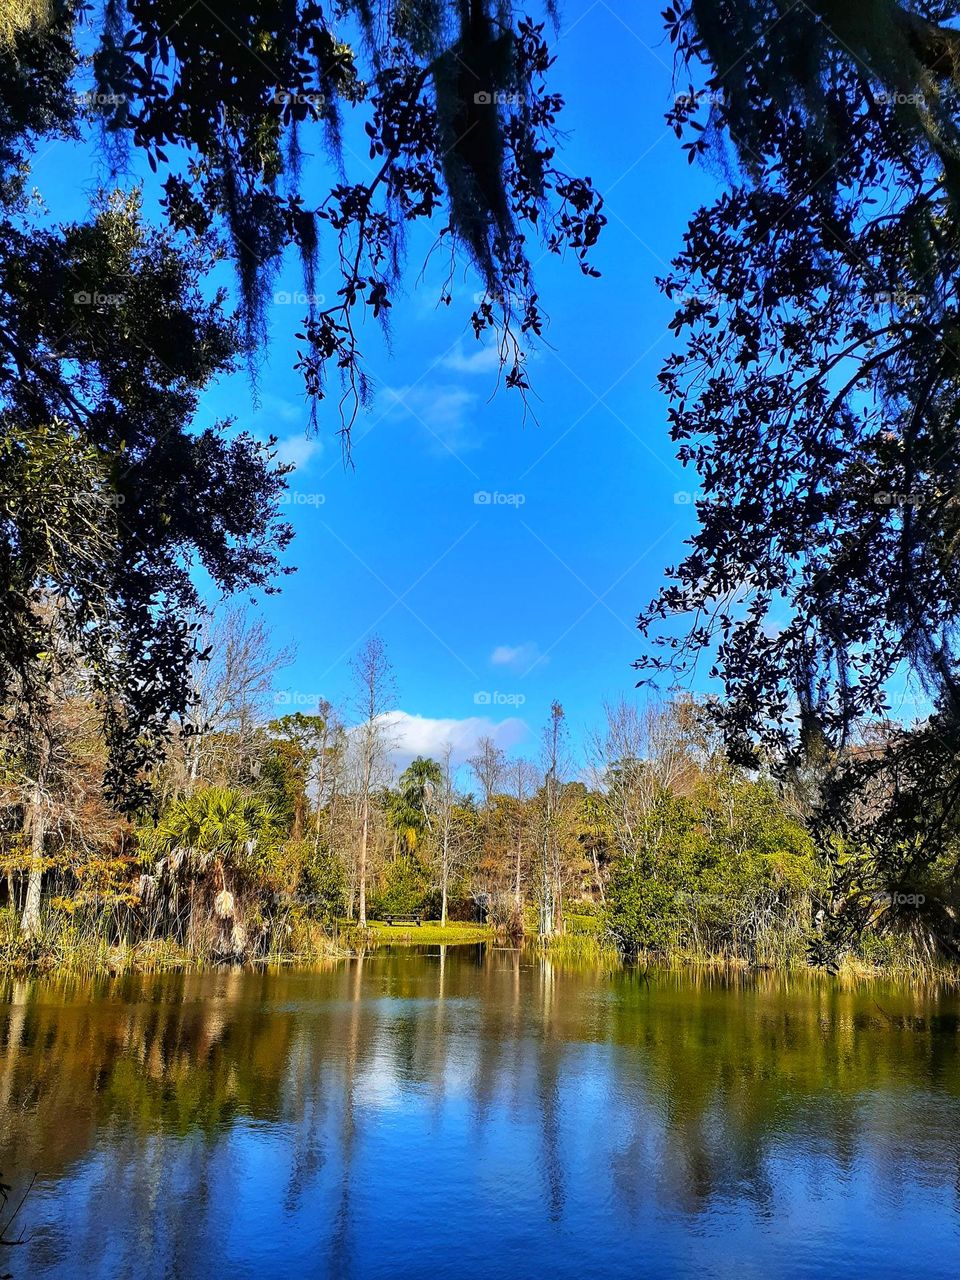 A beautiful landscape view through the trees of Alice's Pond at Mead Botanical Gardens.